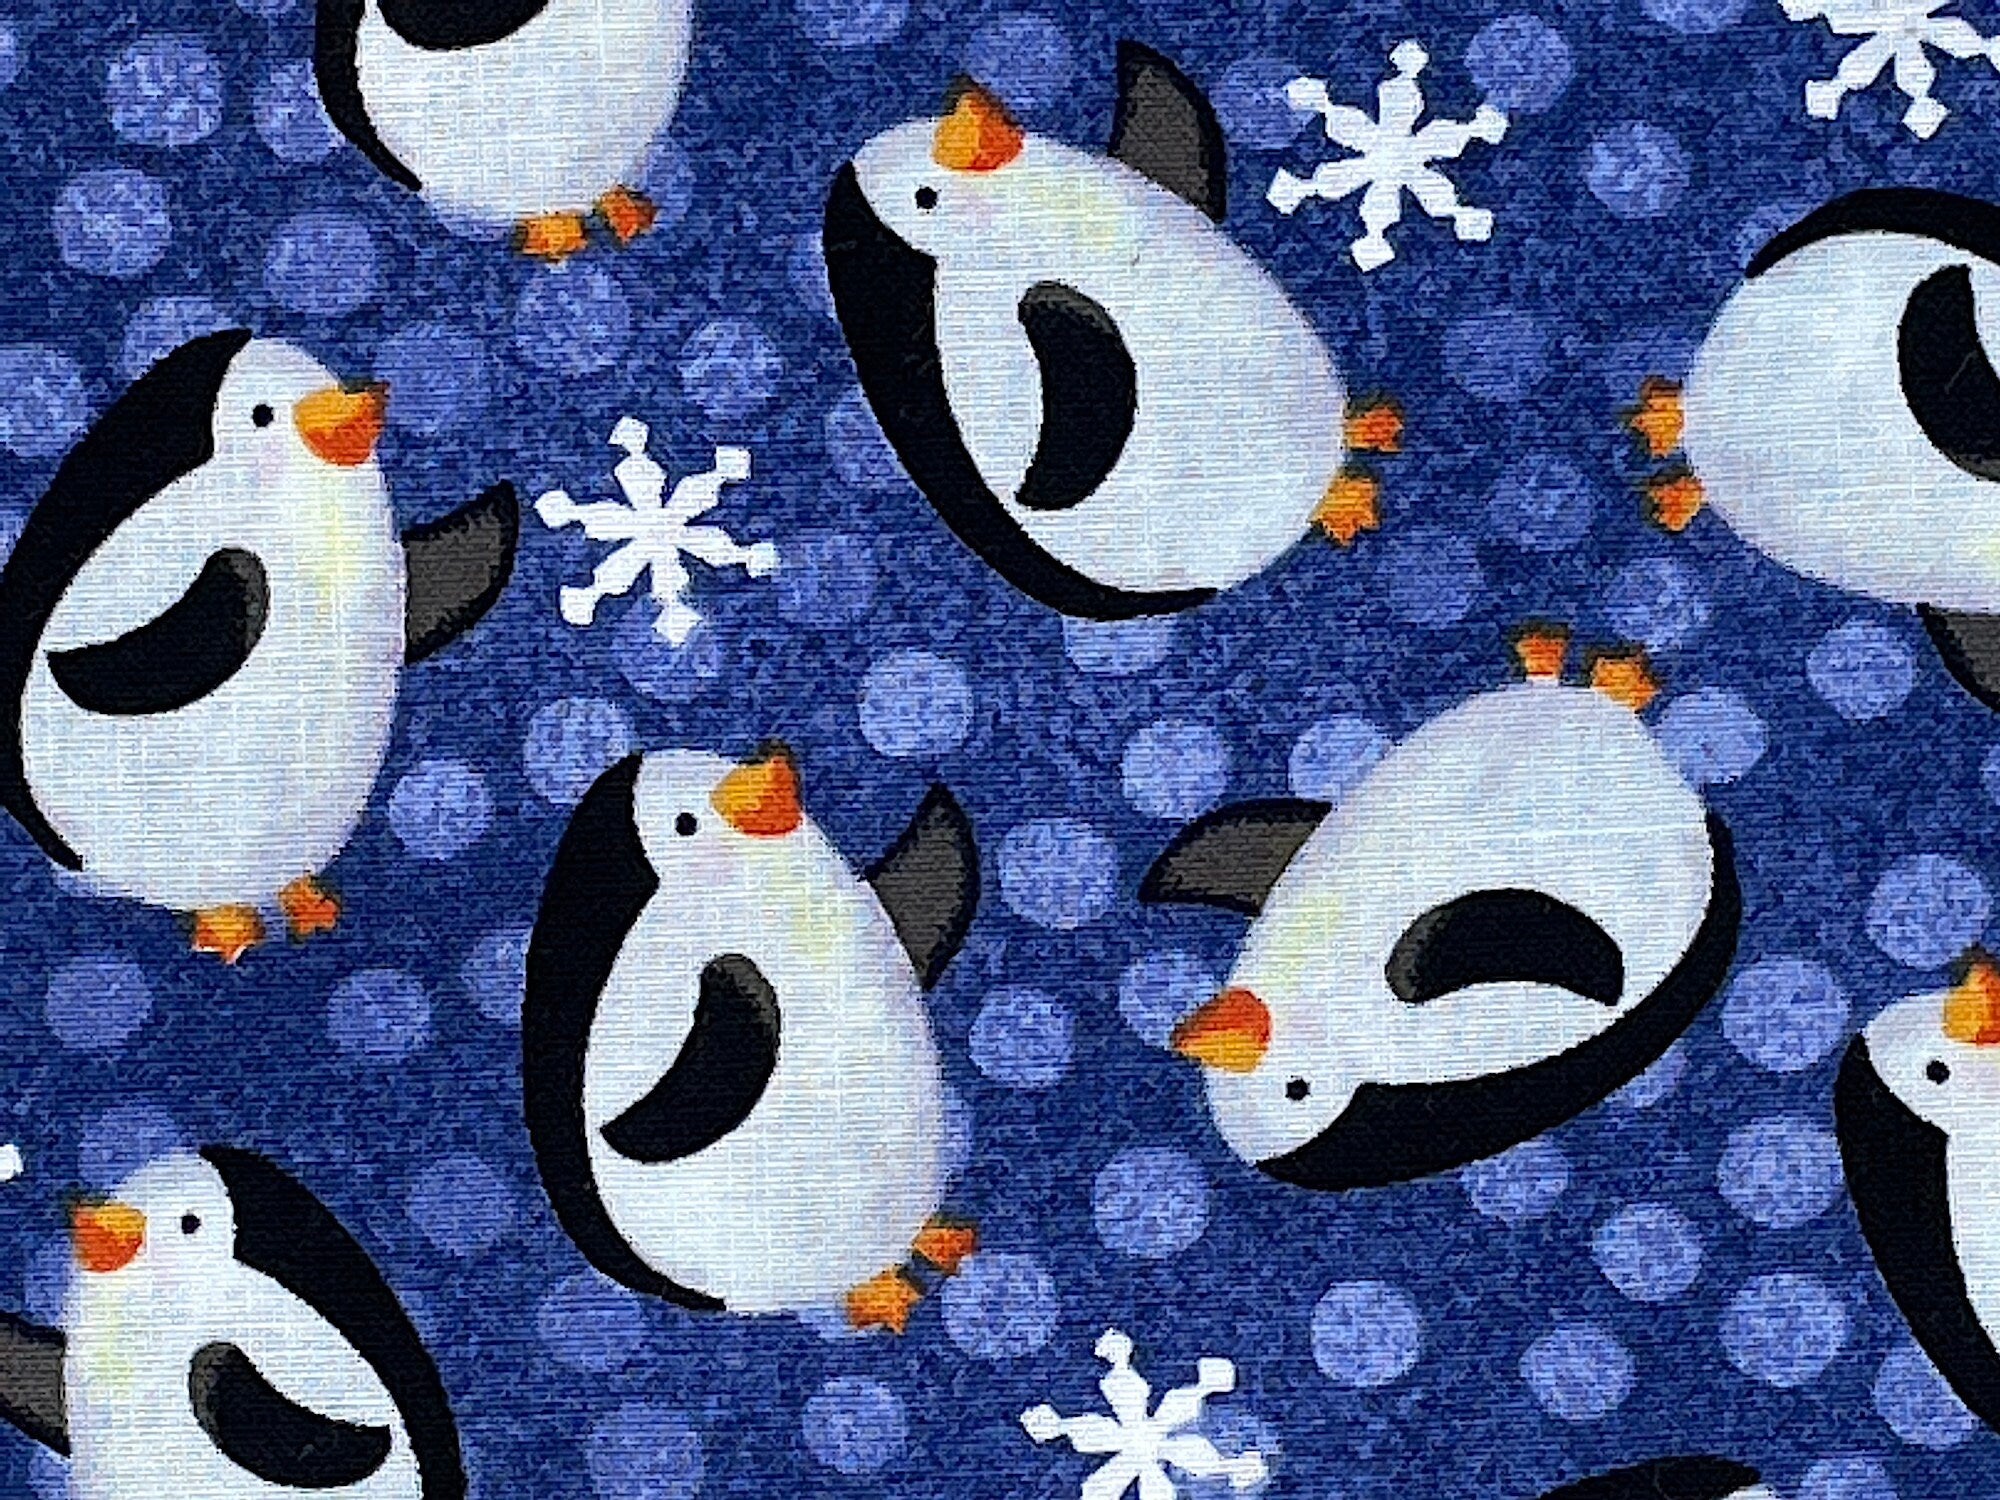 Close up of penguins and snowflakes.